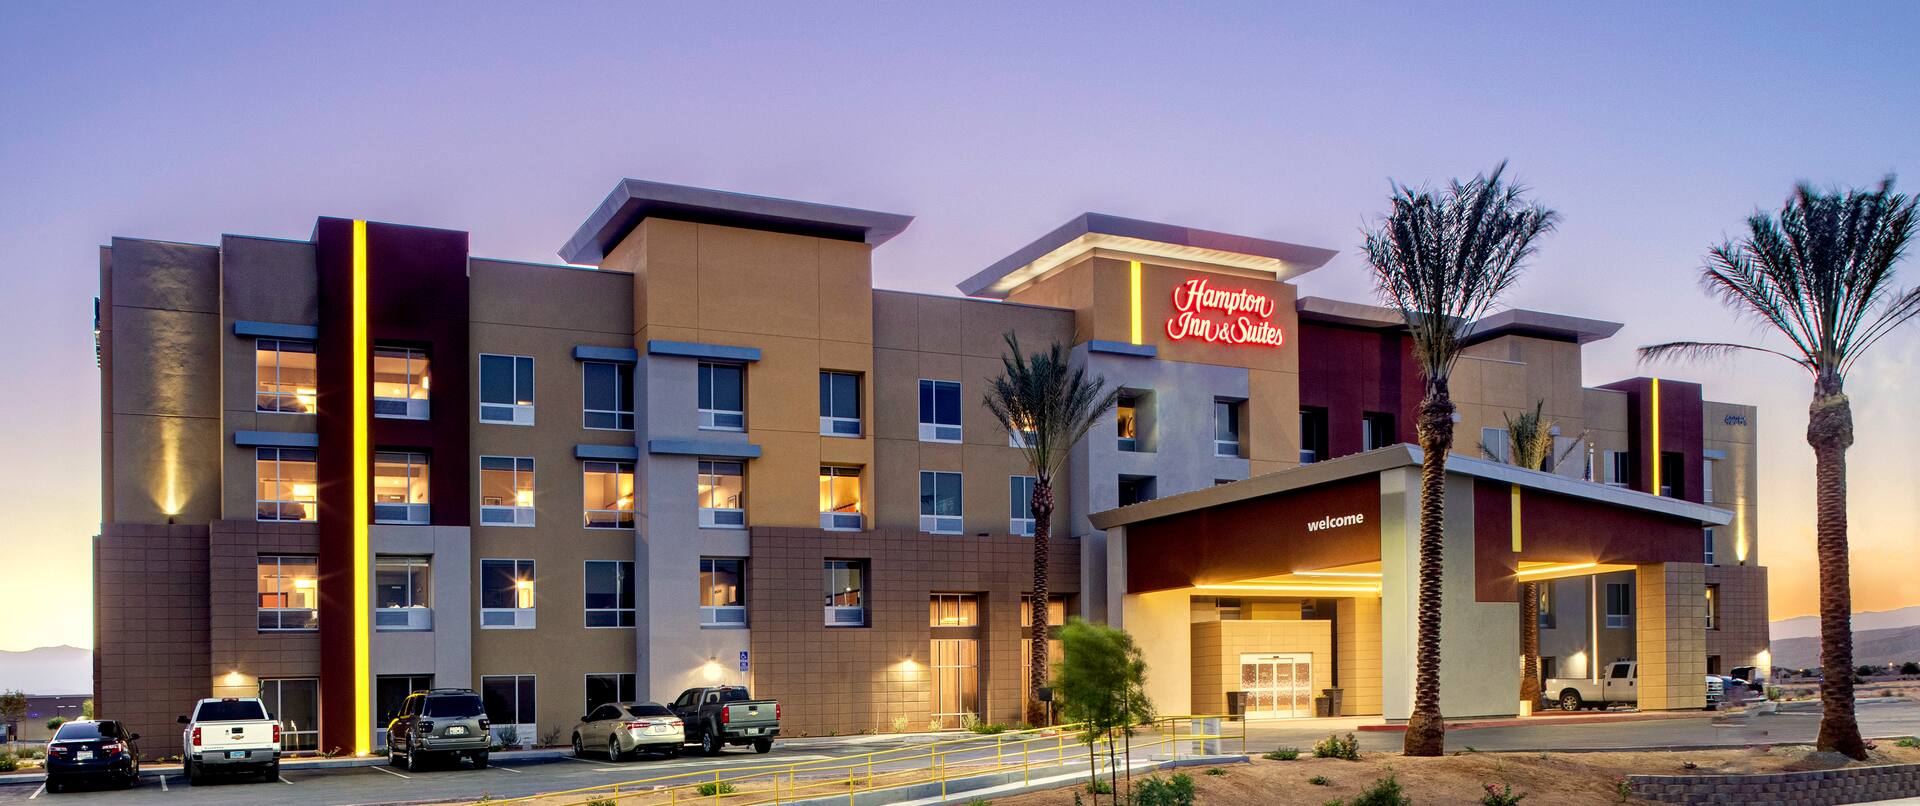 Hampton Inn and Suites Hotel Exterior in the Evening